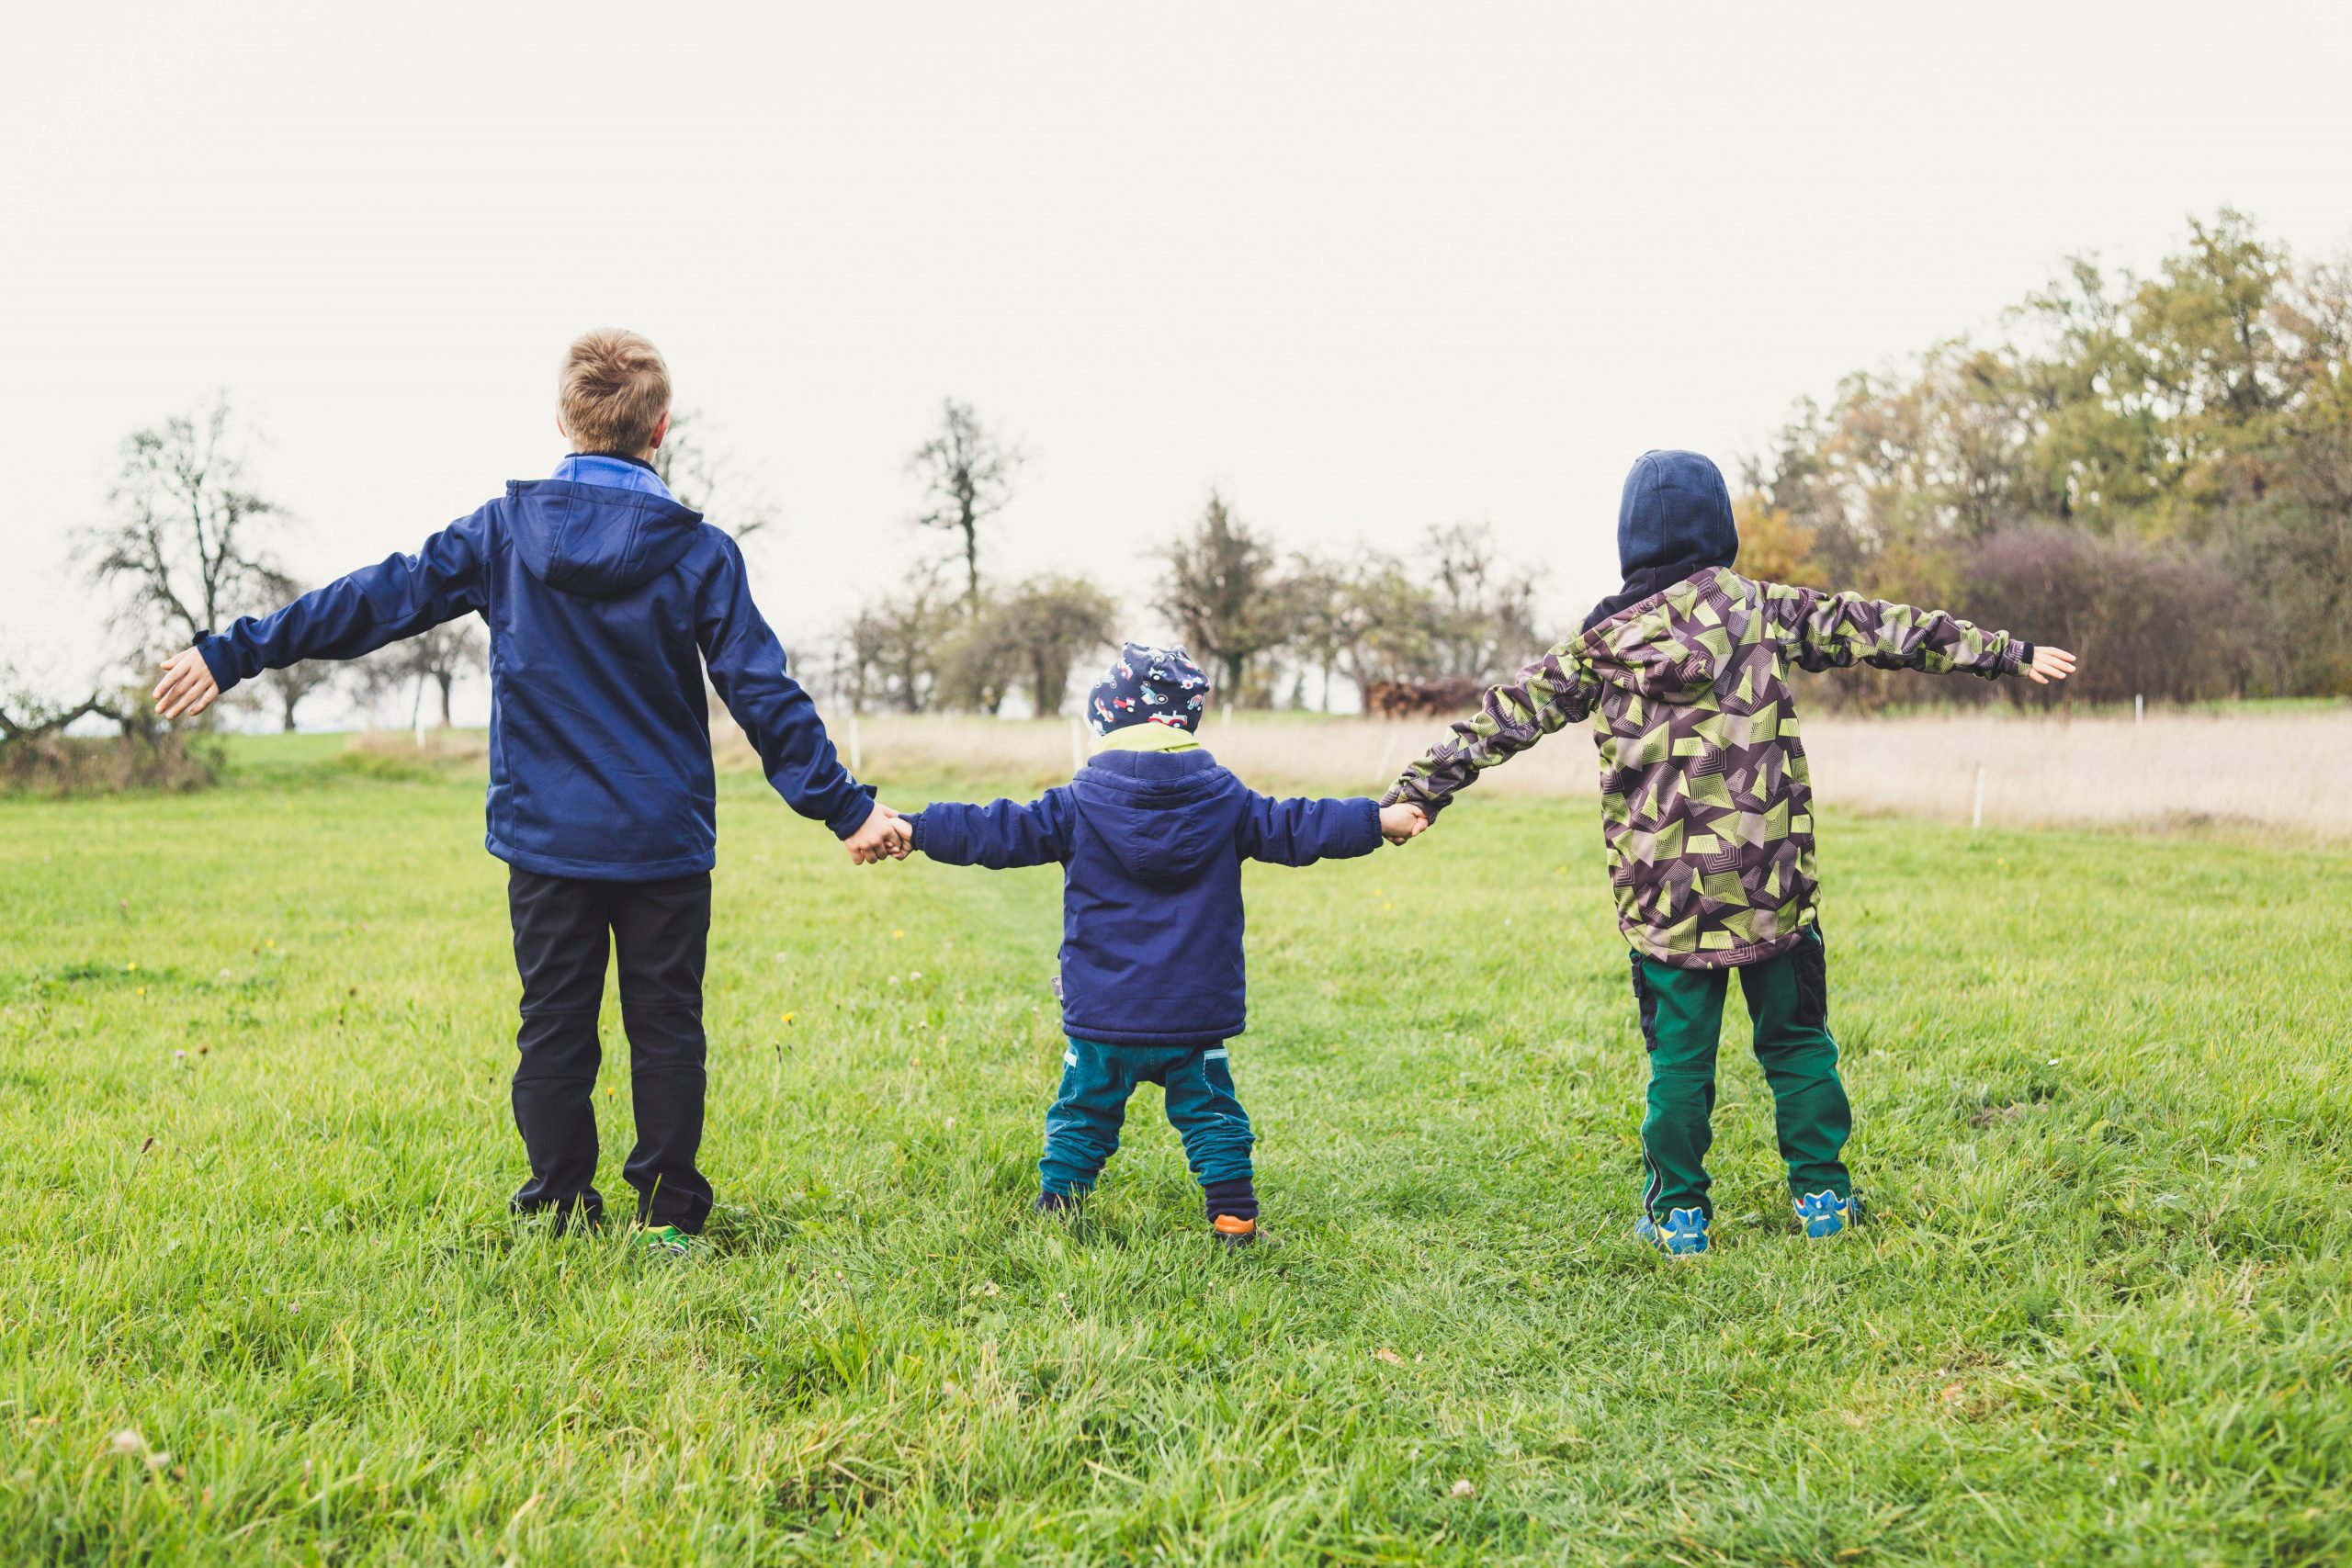 Three children of different ages holding hands outside in a field